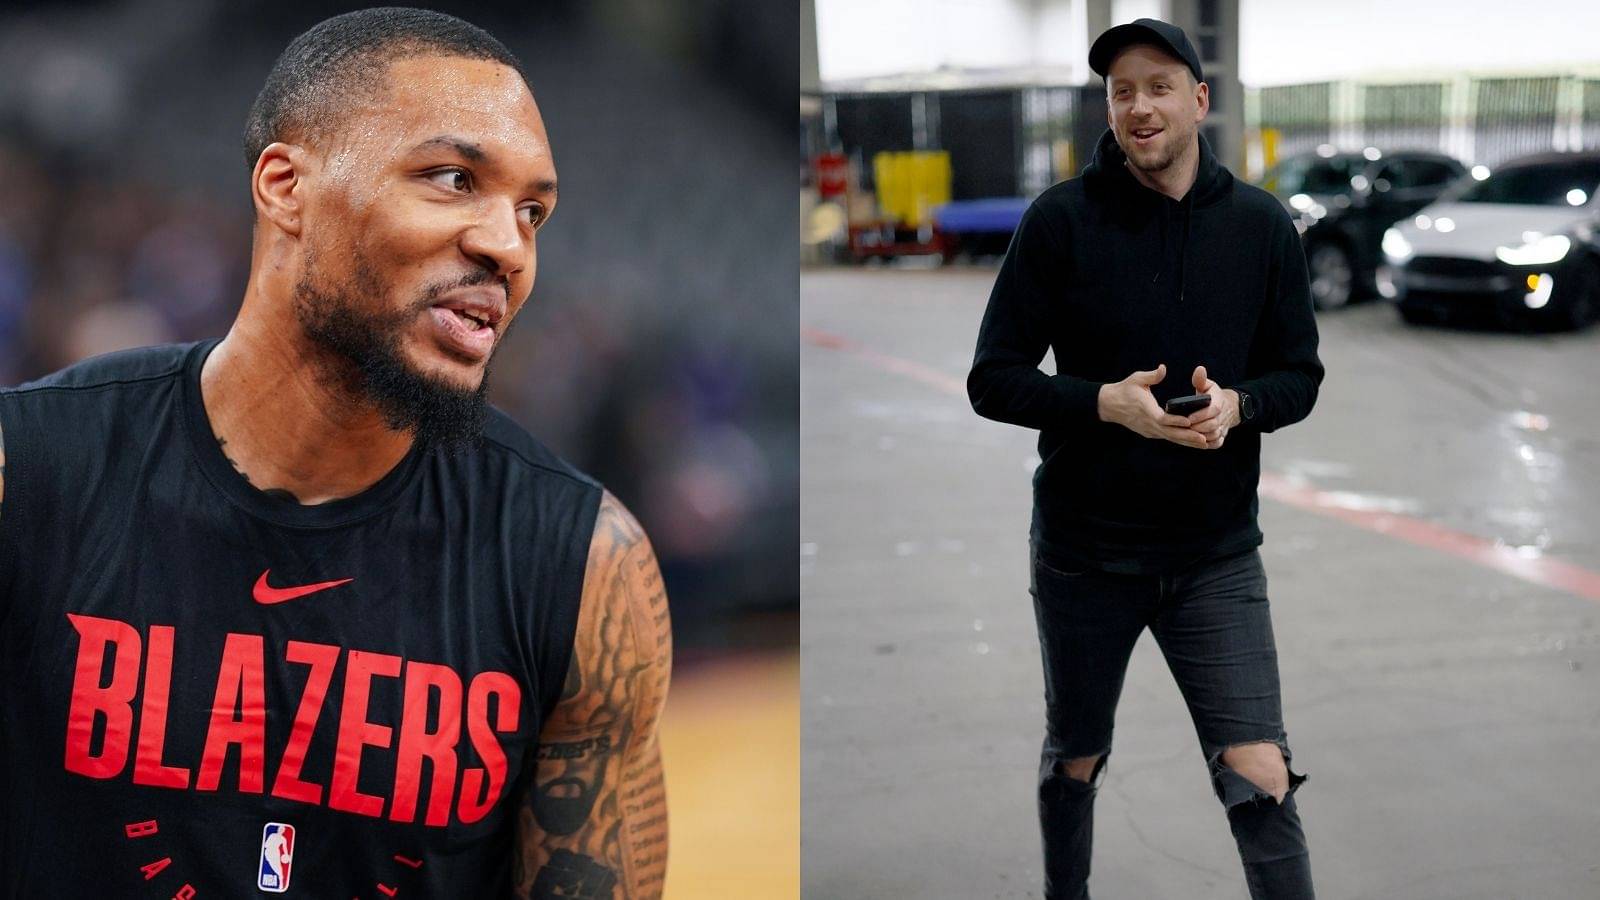 "I made the playoffs": Damian Lillard has in fact made the post-season, jokes with new teammate Joe Ingles on Twitter